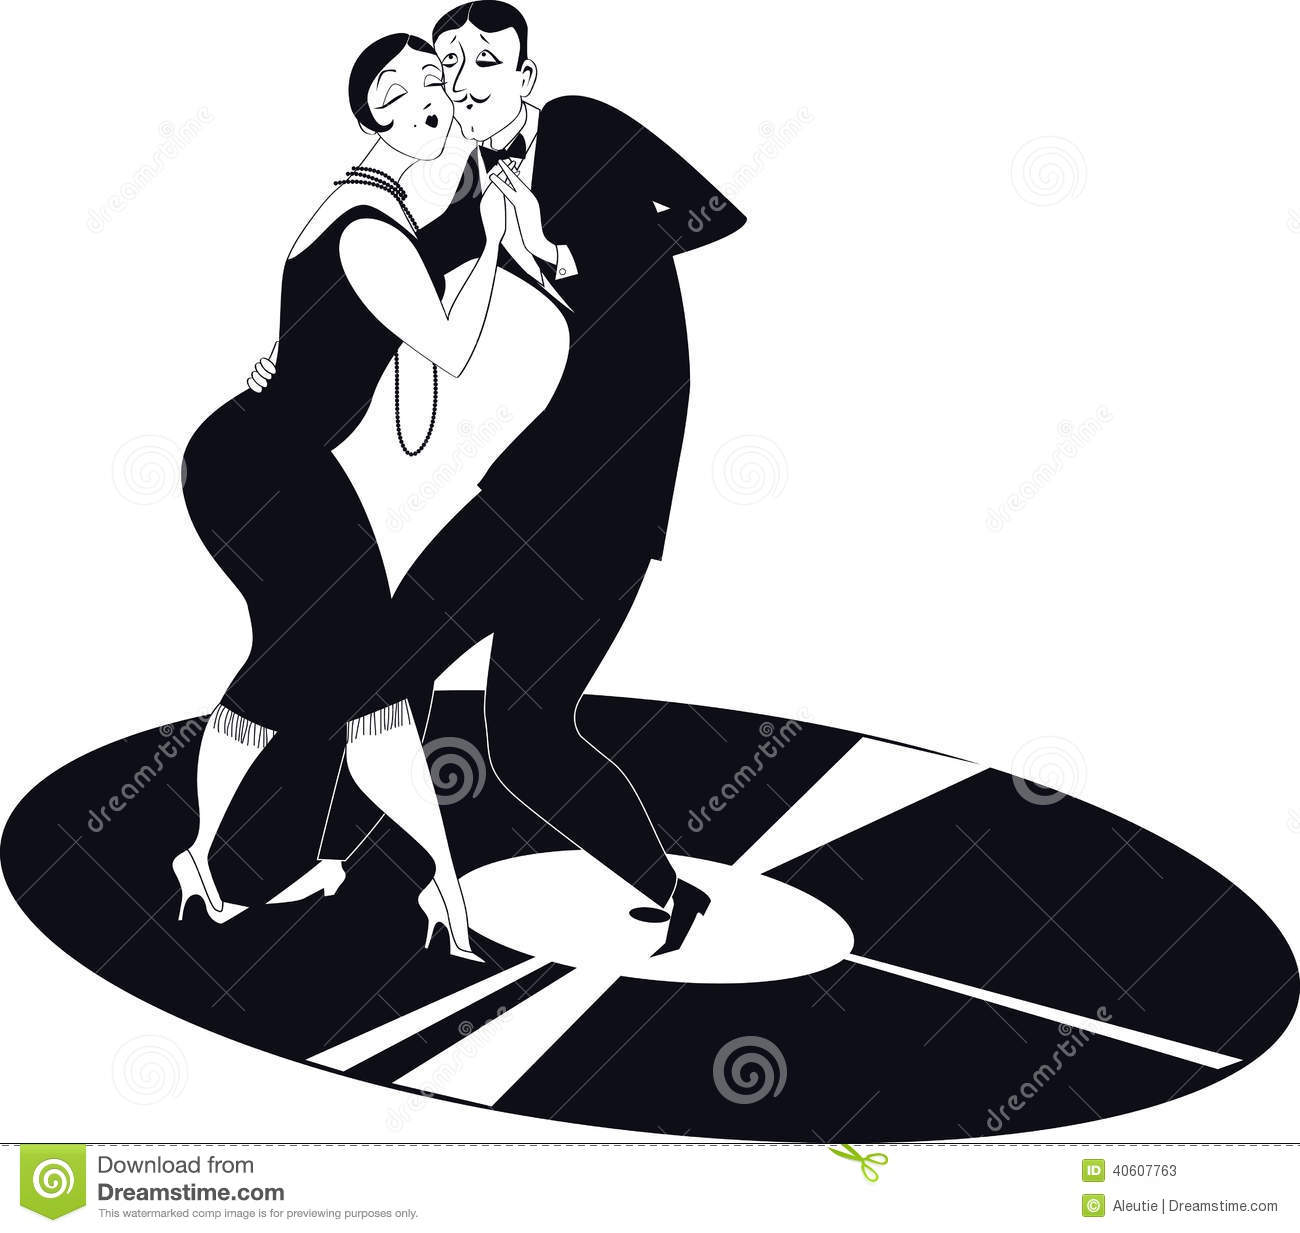 Cartoon Couple Dancing Tango On A Gramophone Record Black And White